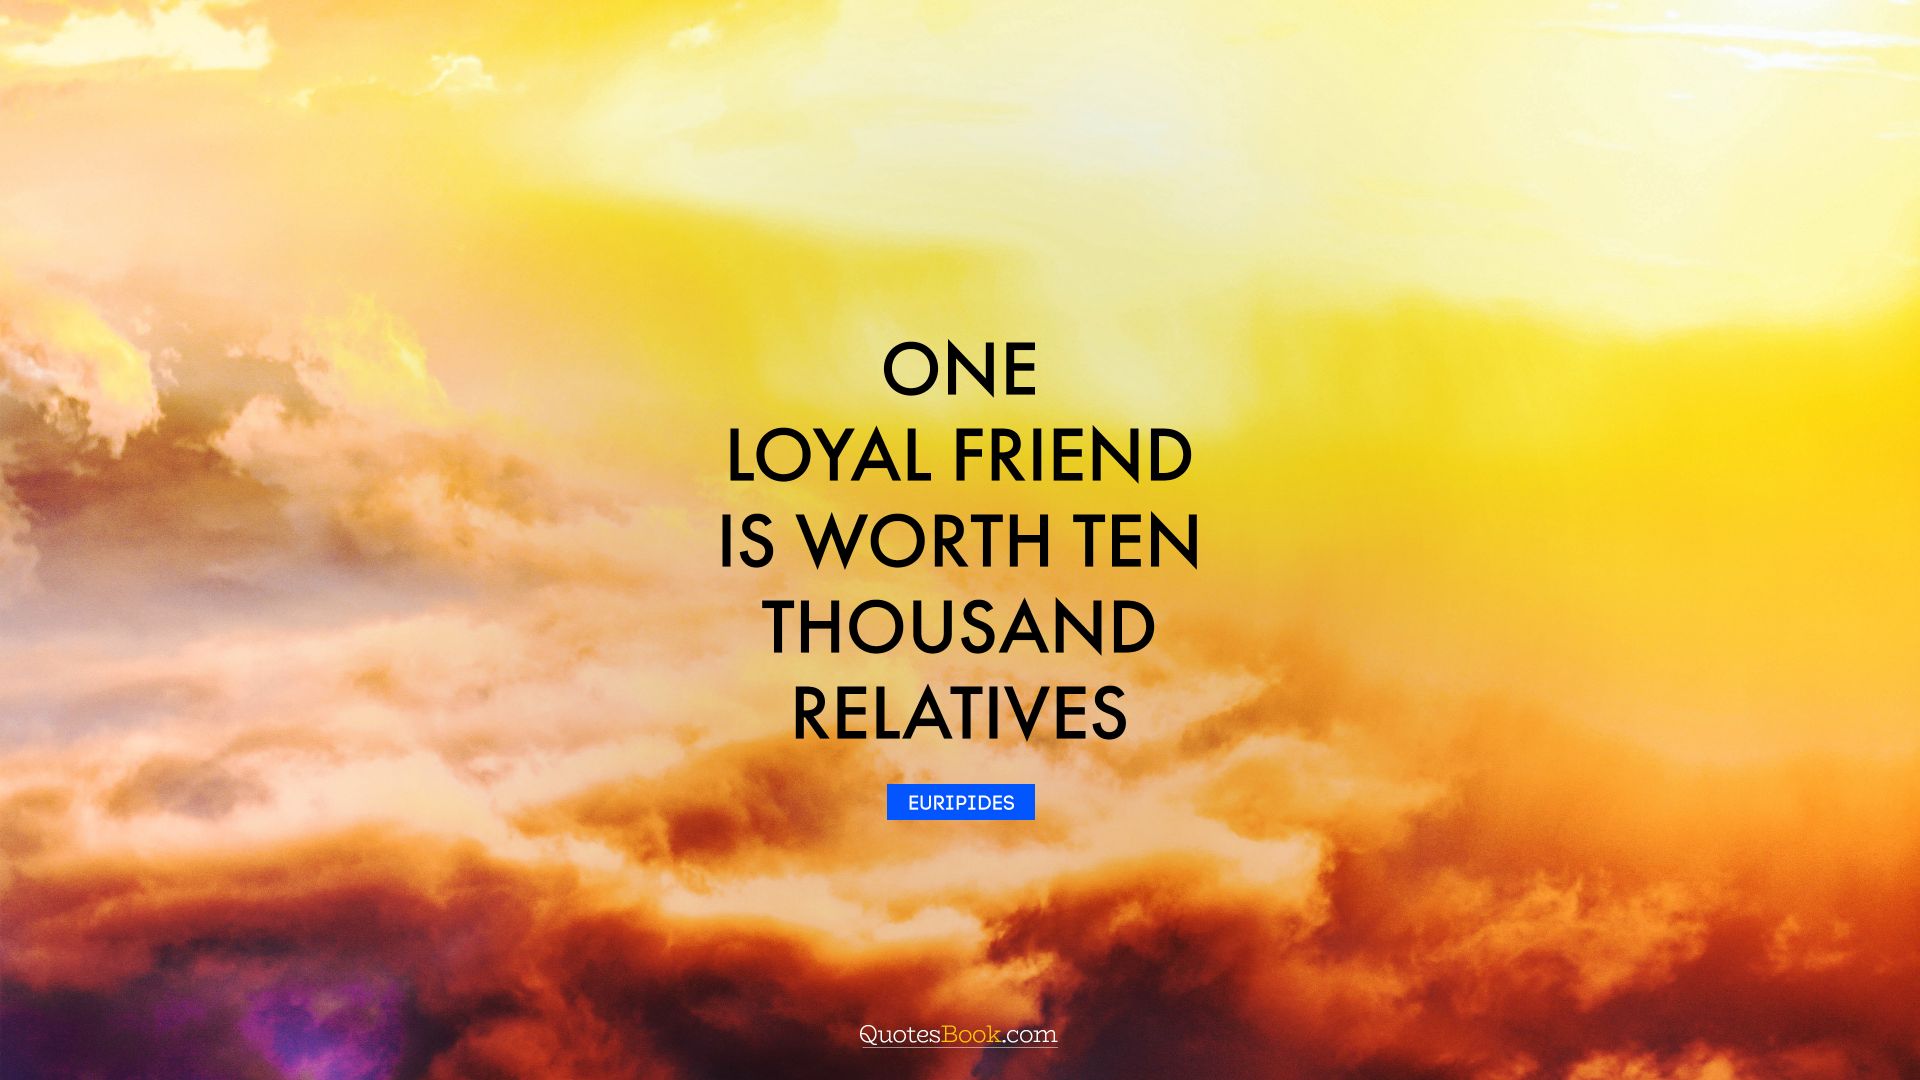 One loyal friend is worth ten thousand relatives. - Quote by Euripides